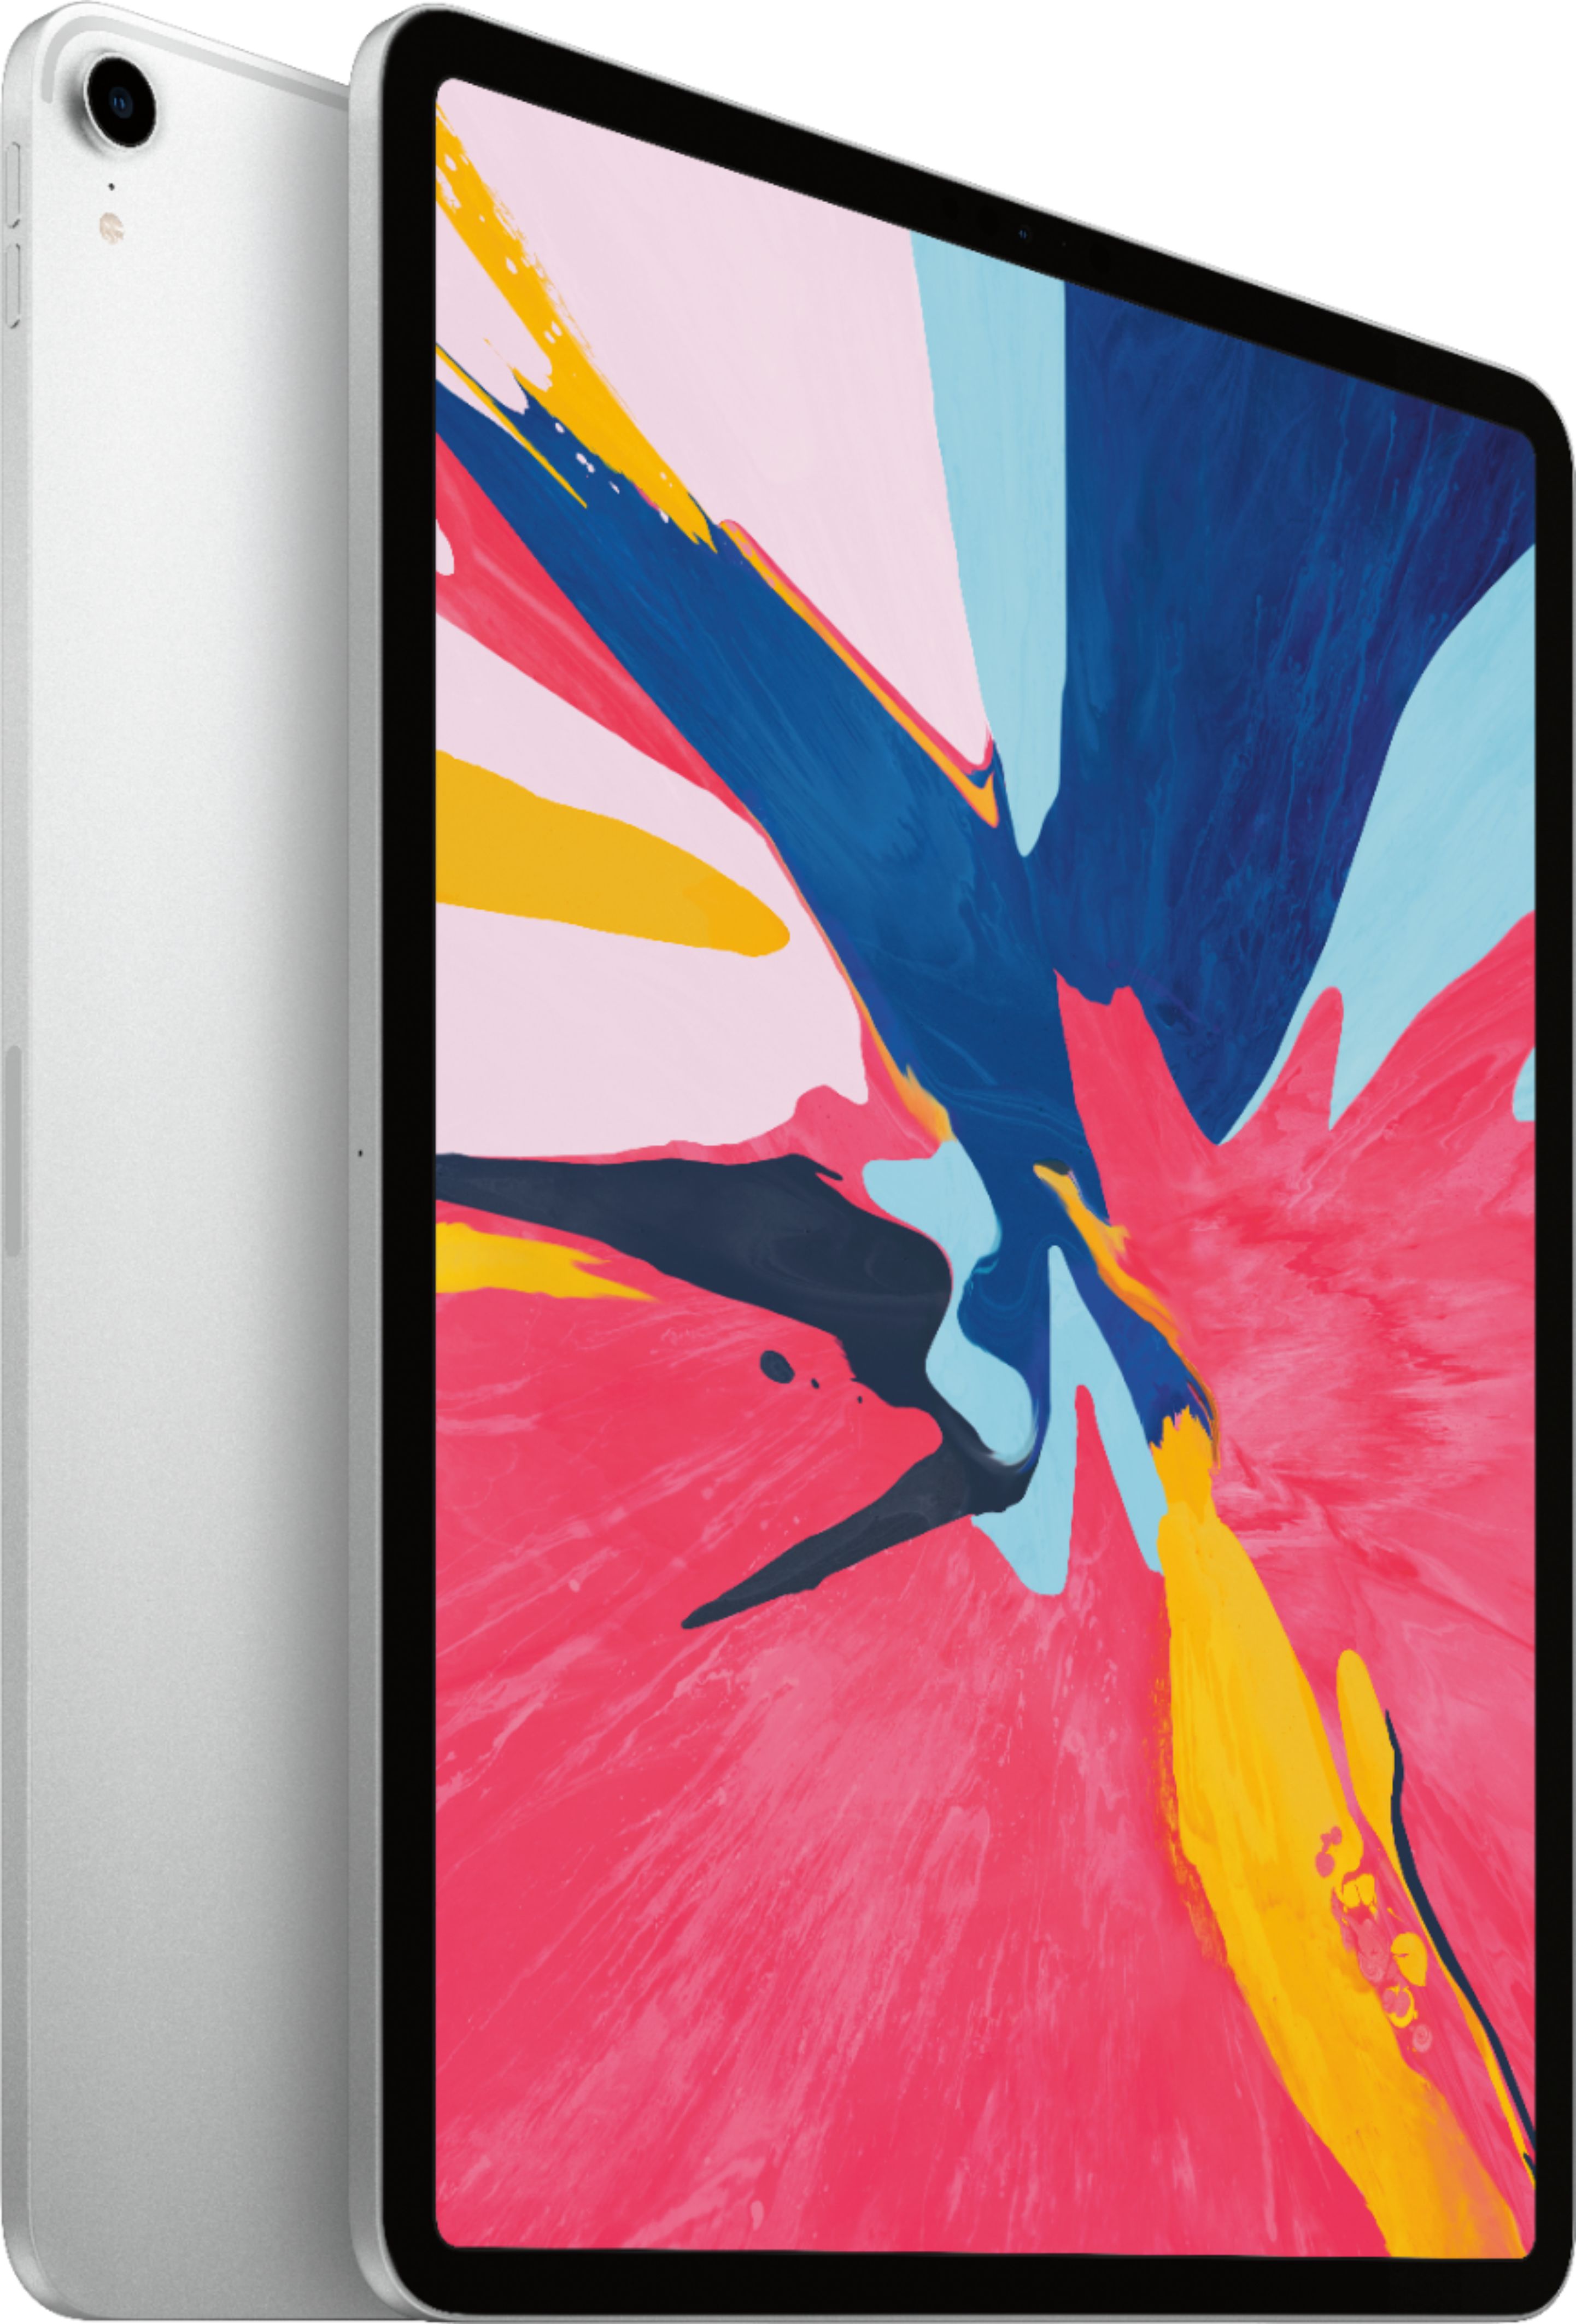 Angle View: Apple - Geek Squad Certified Refurbished 12.9-Inch iPad Pro (Latest Model) with Wi-Fi - 128GB - Silver